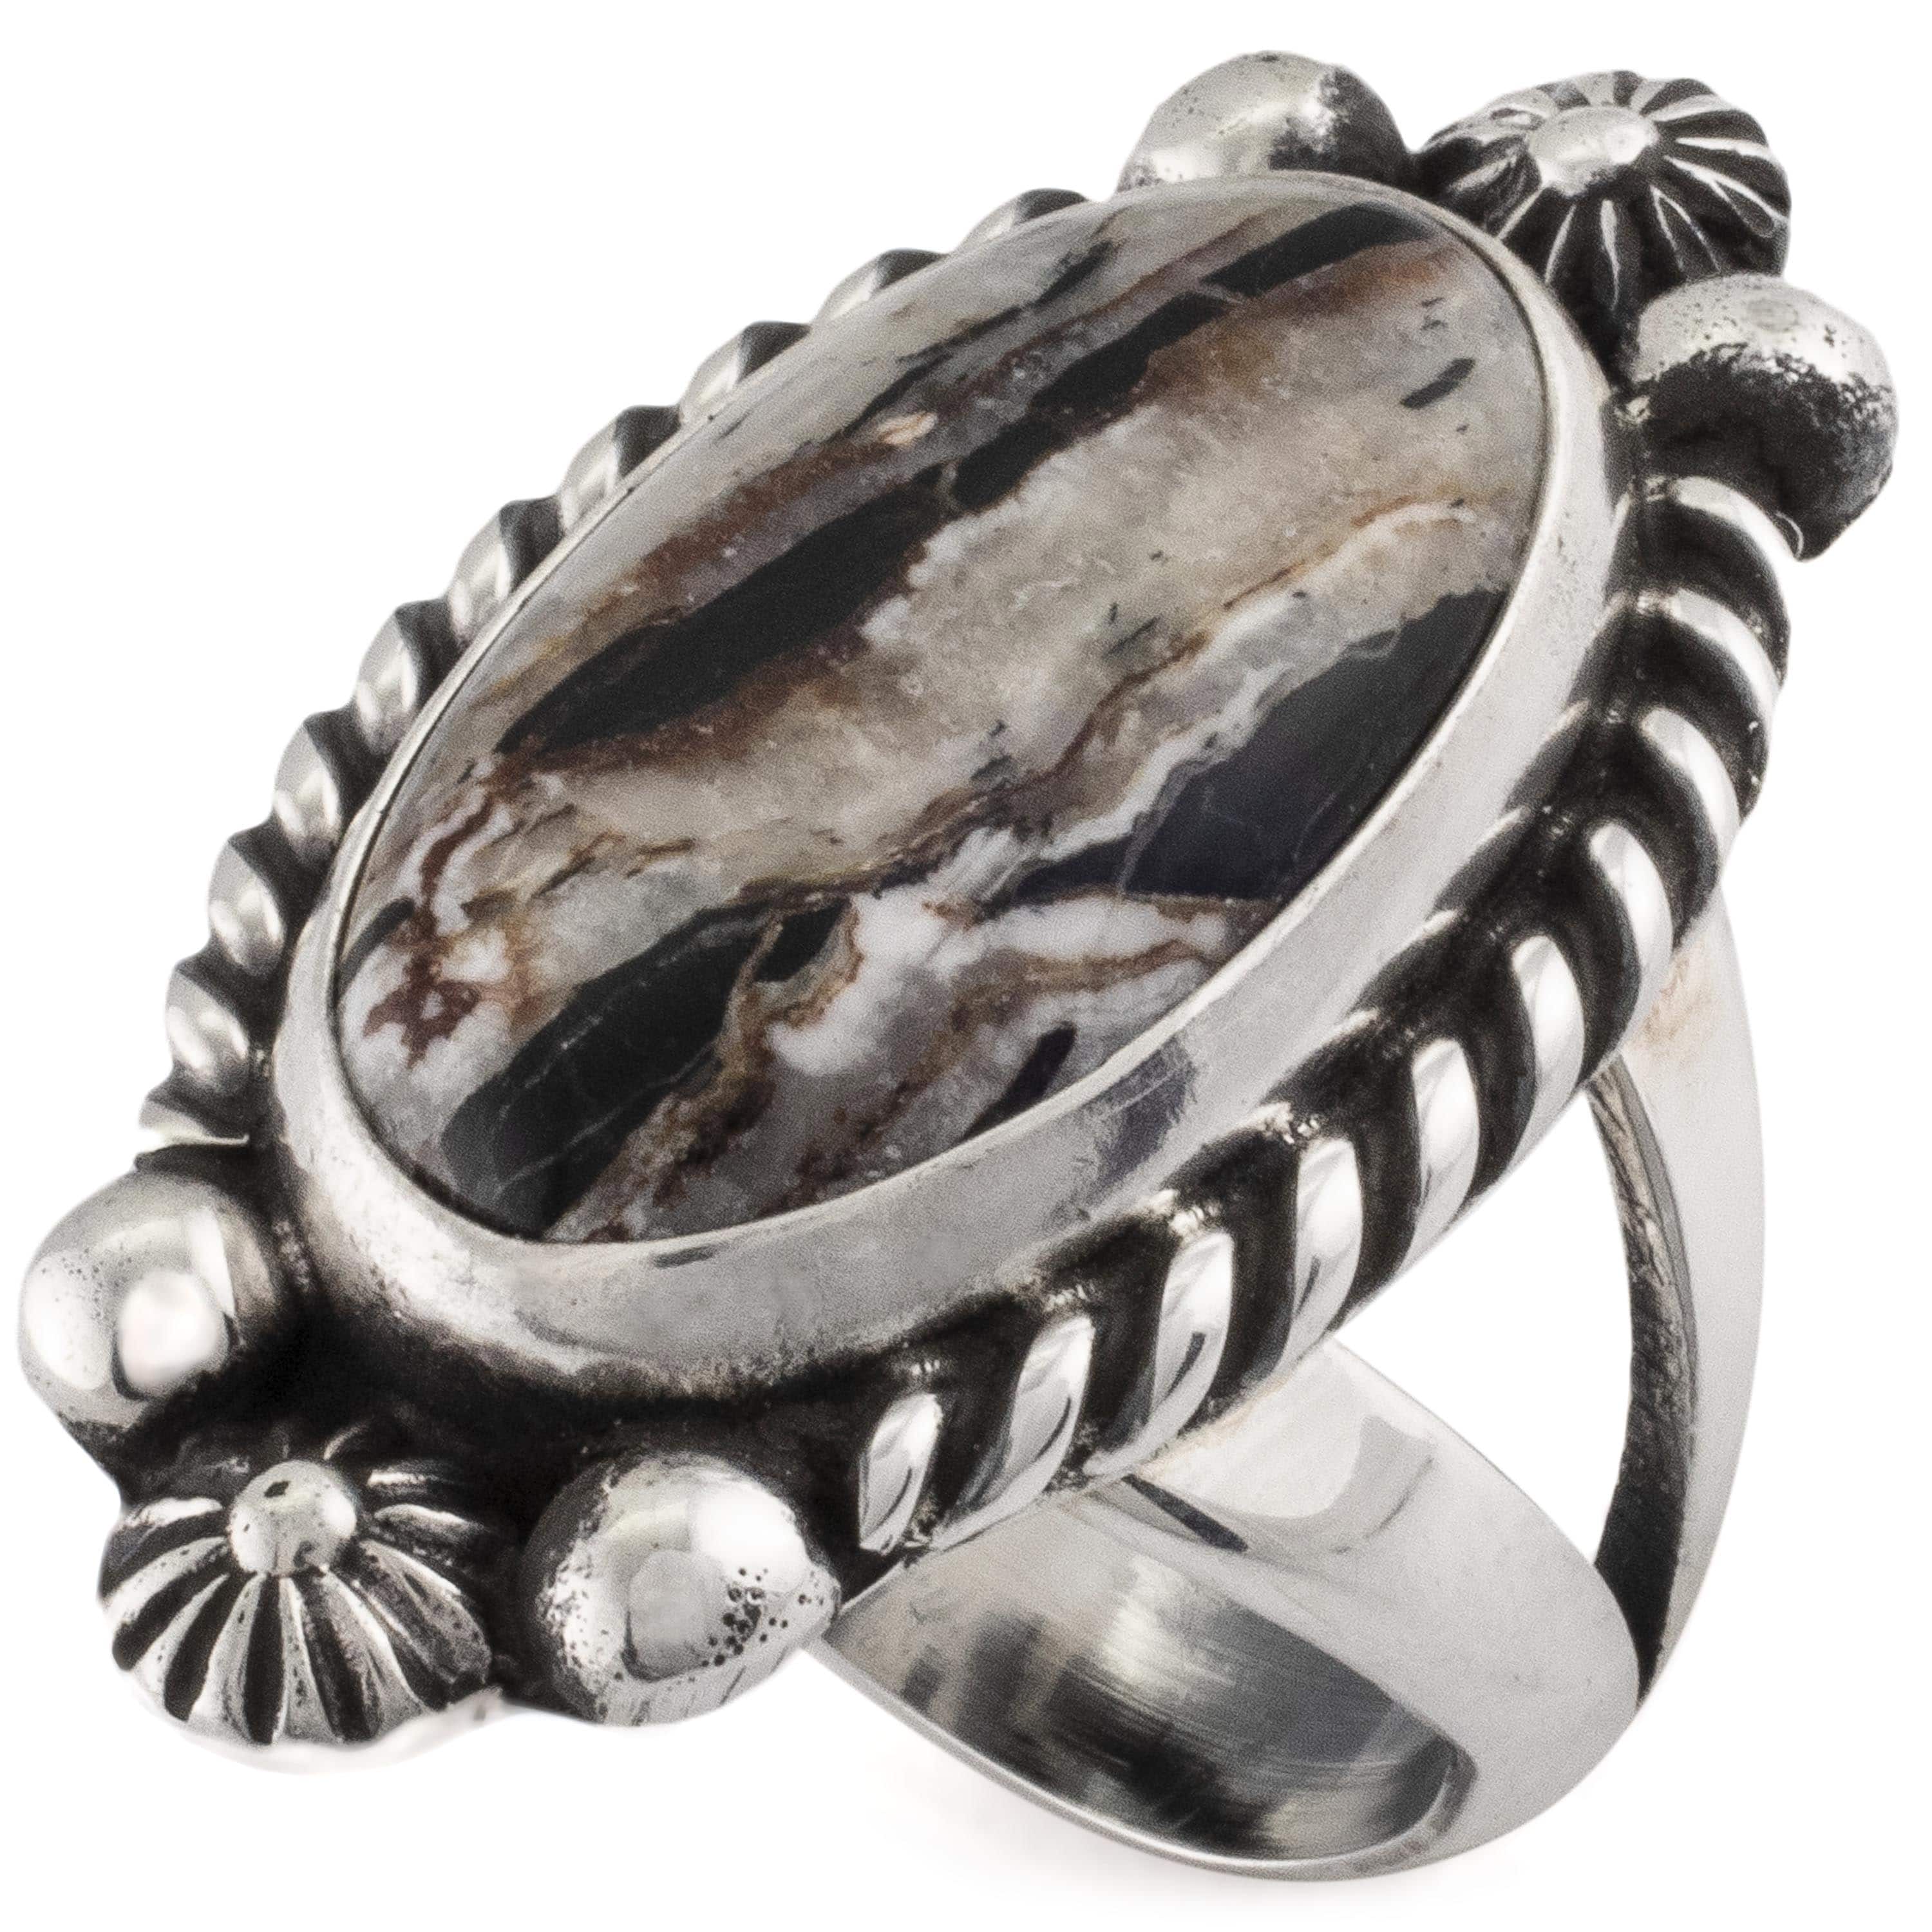 Kalifano Native American Jewelry 8 Eddie Secatero Navajo White Buffalo Turquoise USA Native American Made 925 Sterling Silver Ring NAR800.029.8